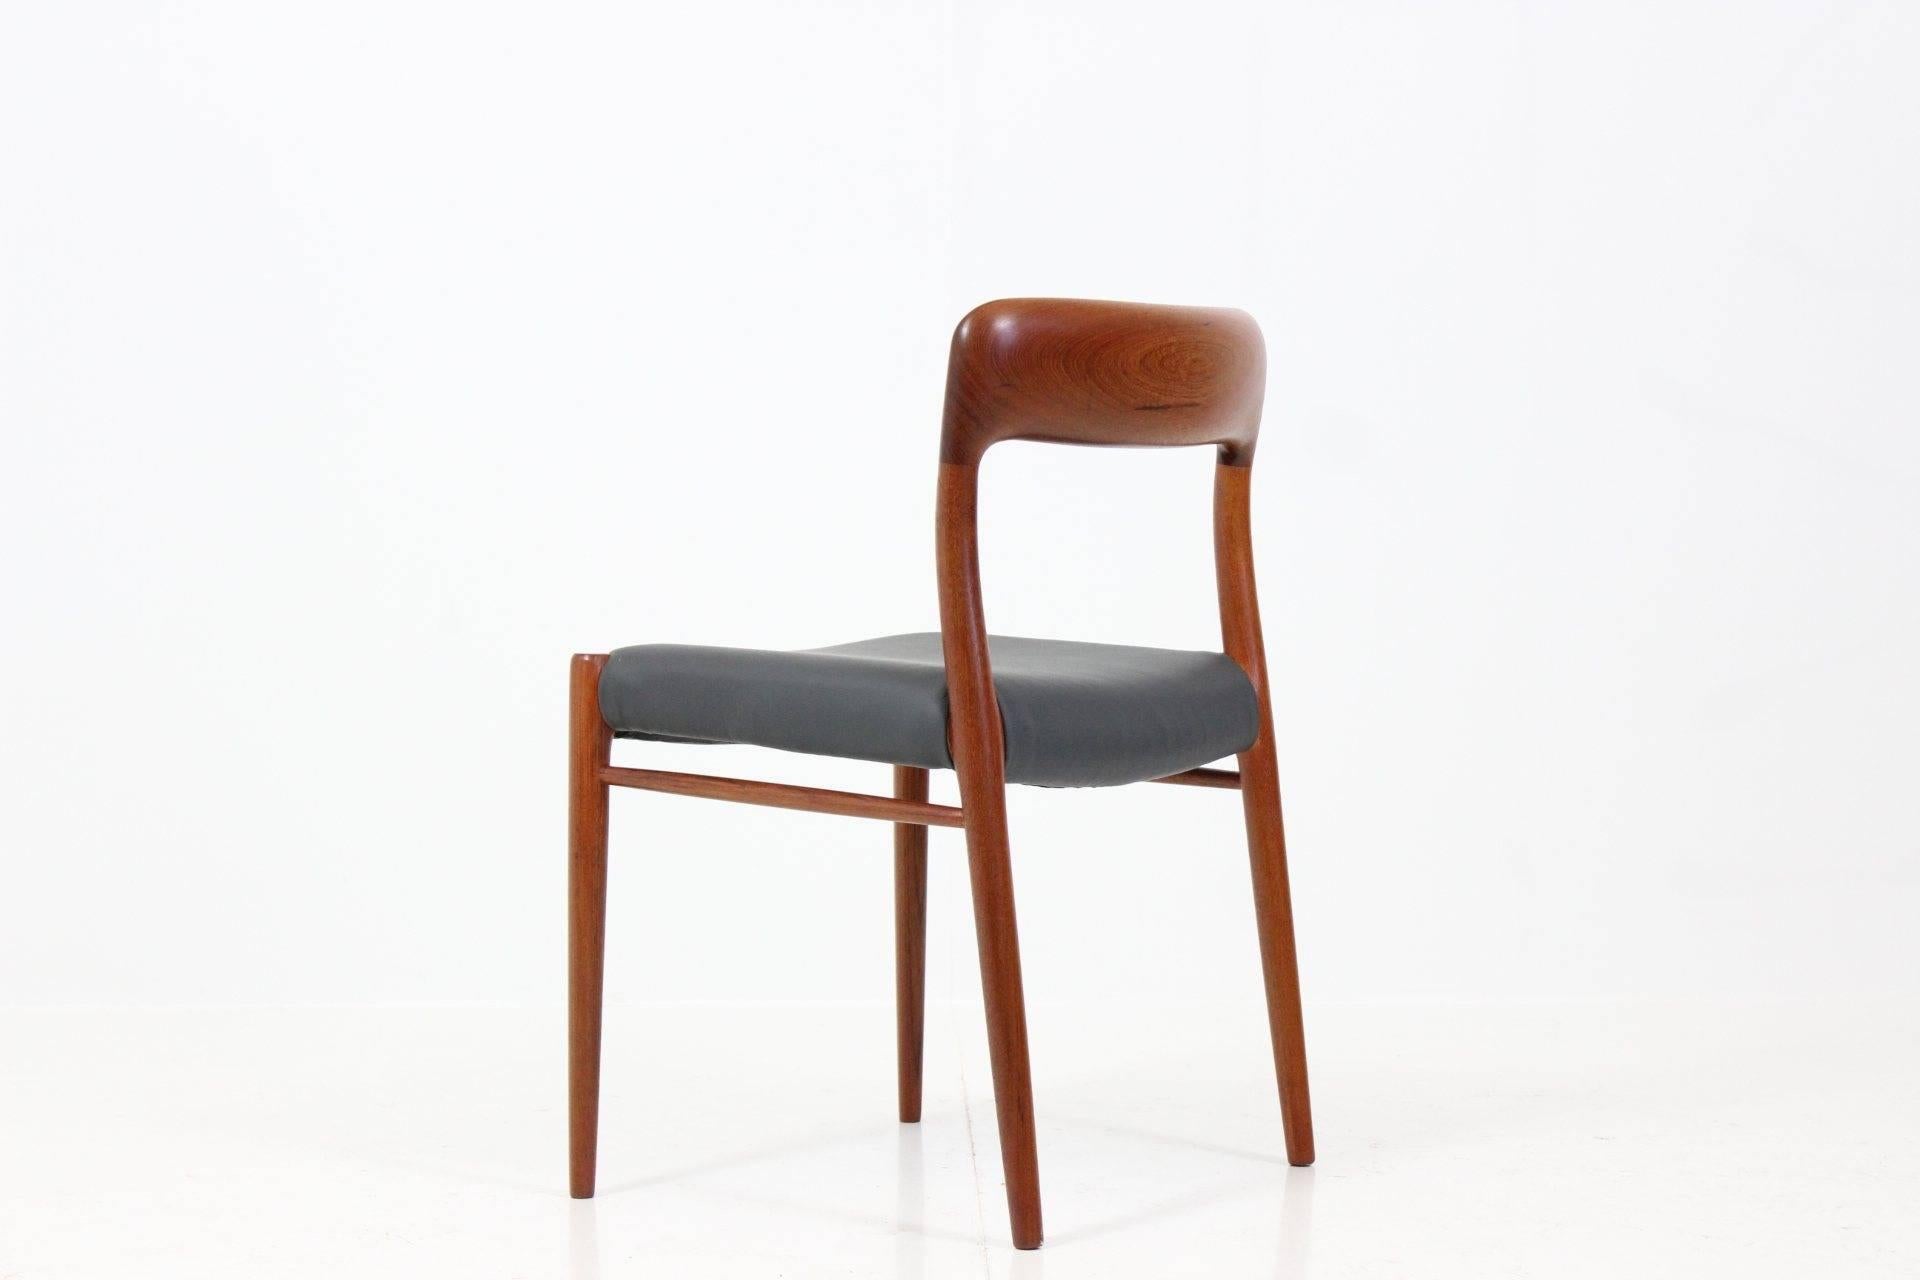 Mid-20th Century Set of Four Teak Dining Chairs Model 75 by Niels O. Møller